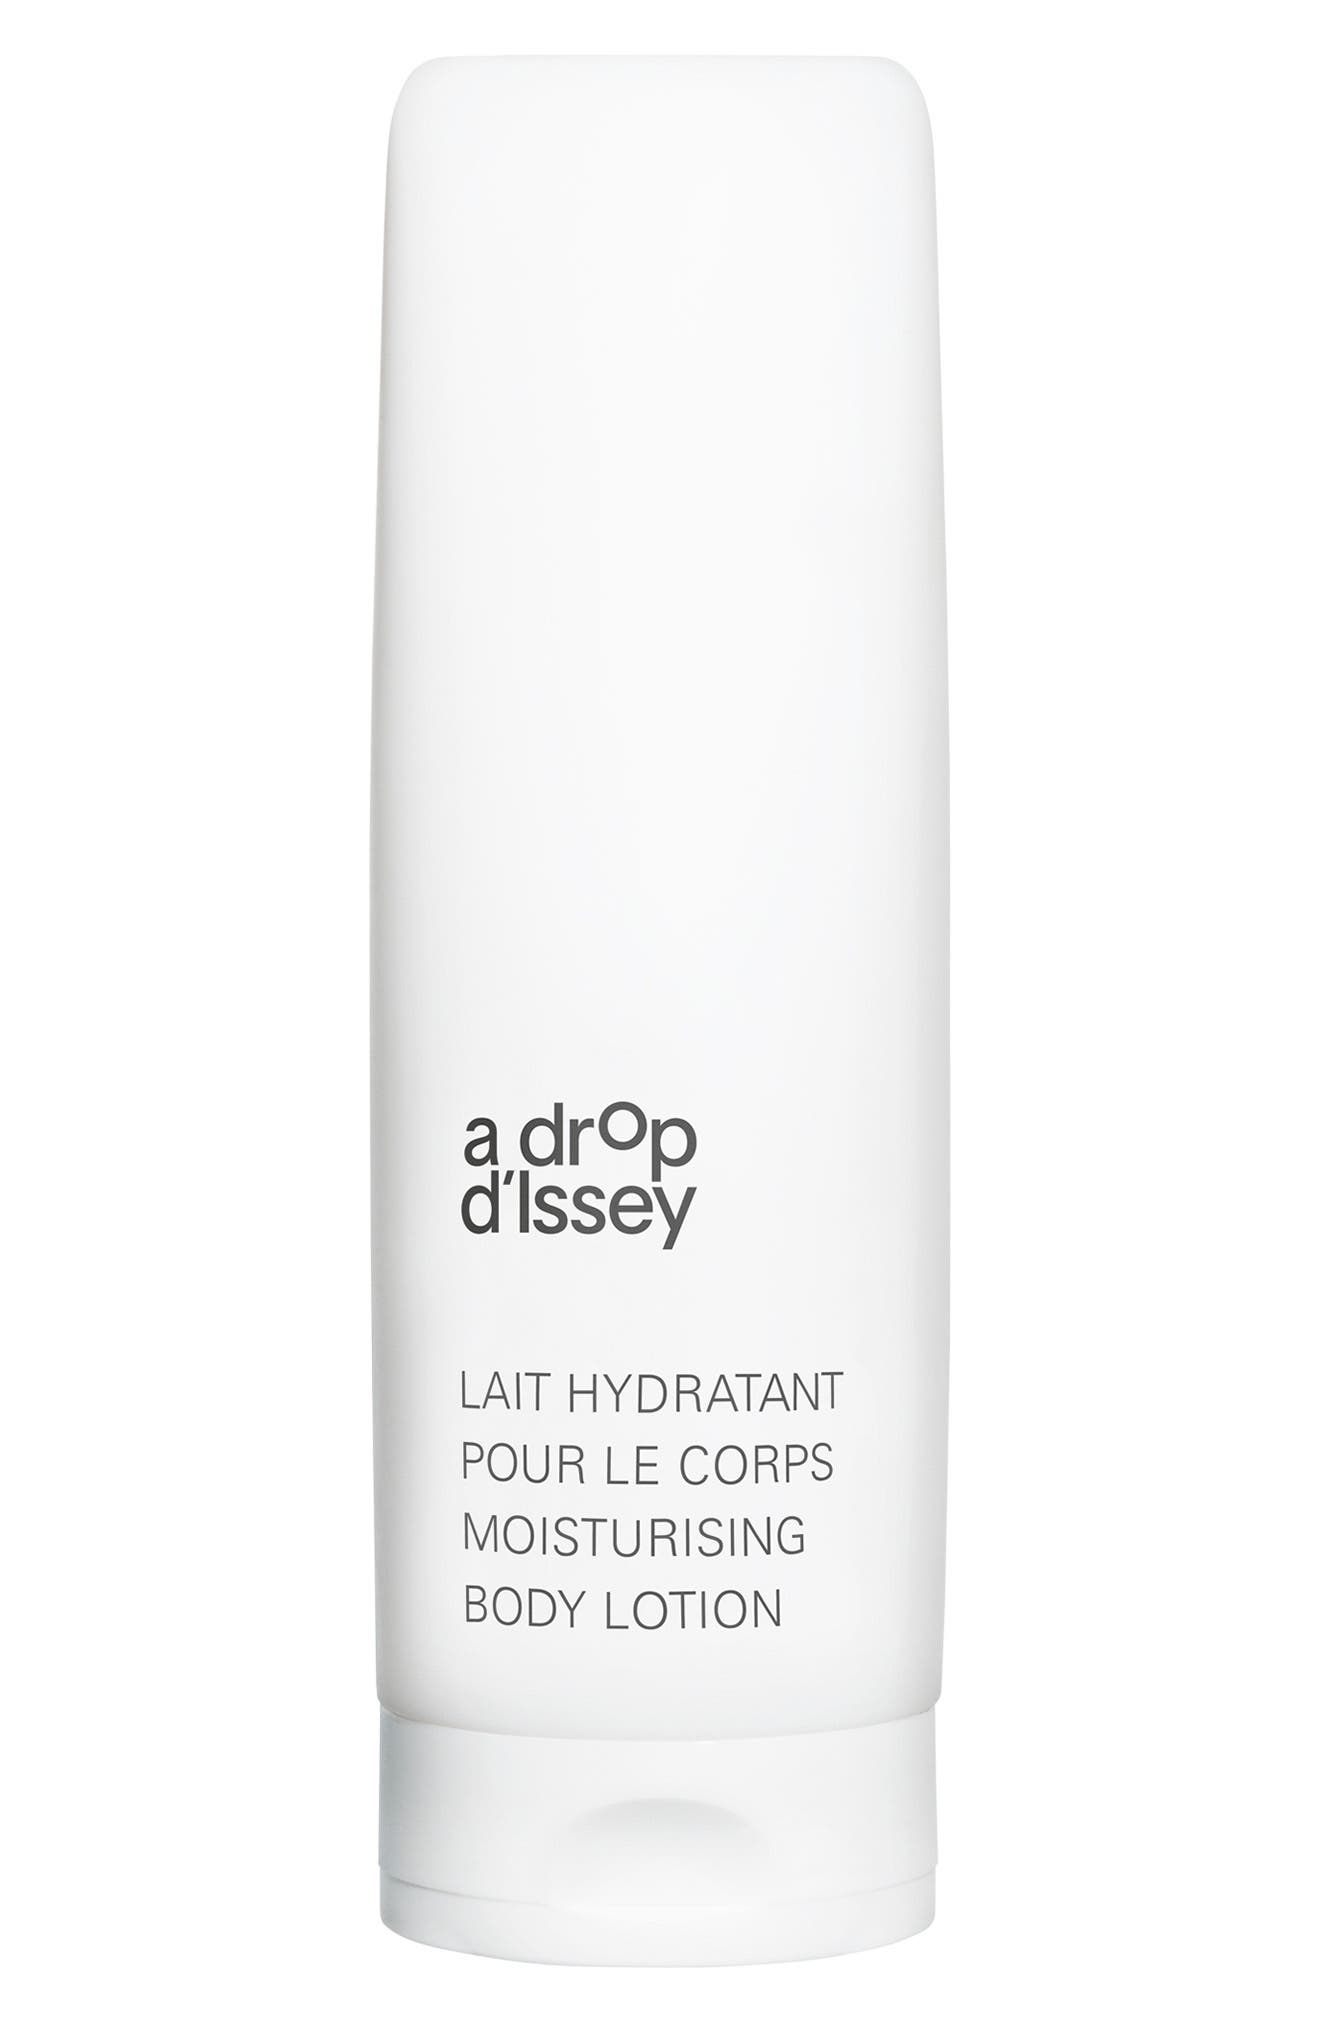 Issey Miyake A Drop d'Issey Moisturizing Body Lotion at Nordstrom, Size 6.76 Oz